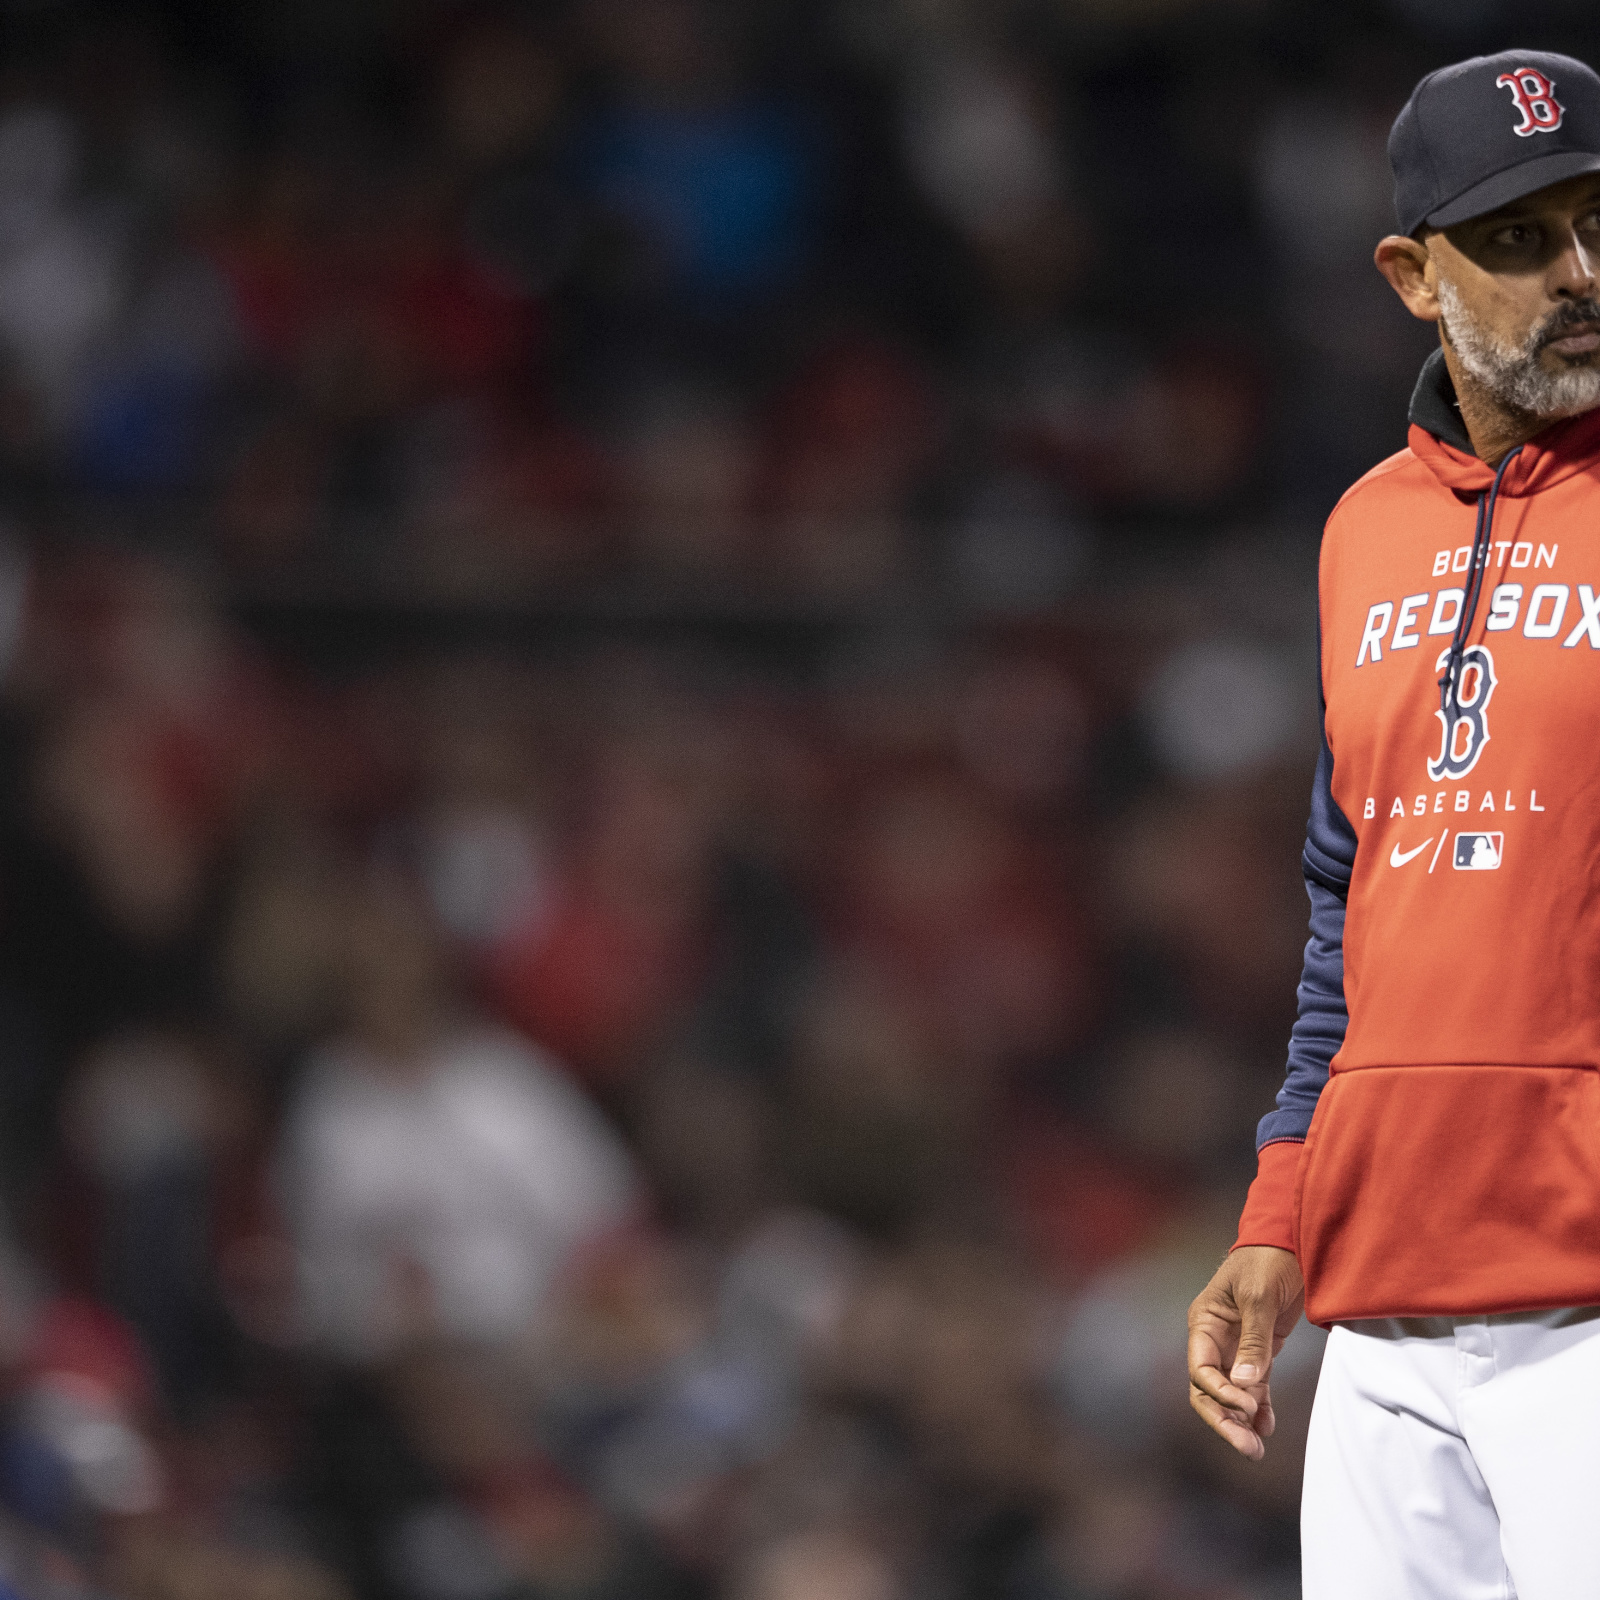 Alex Cora wears LSU jersey during Red Sox batting practice after